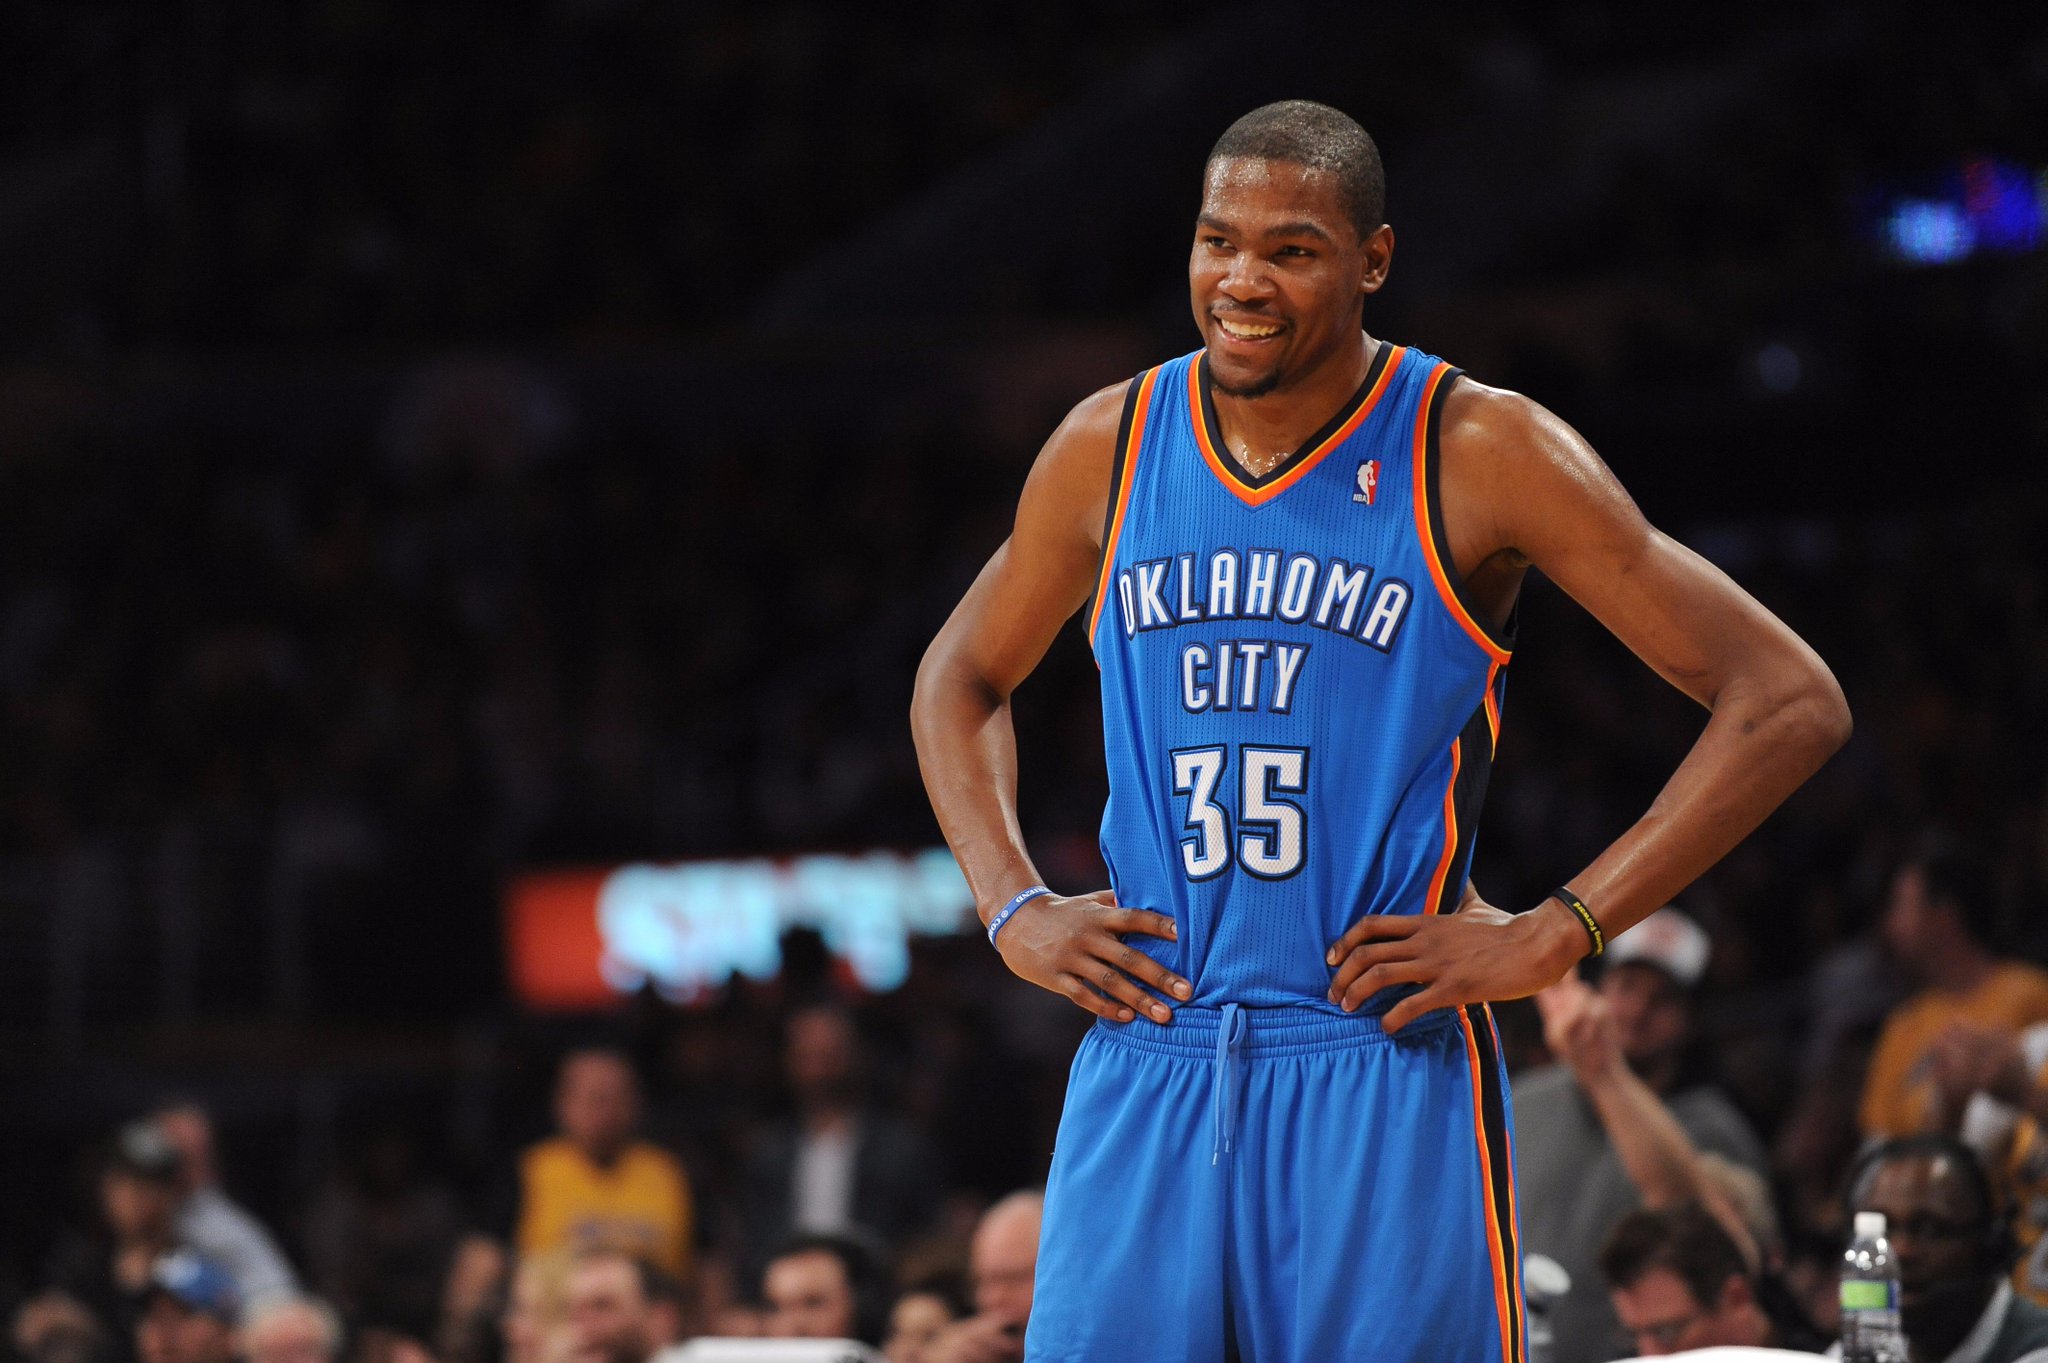 Happy 27th birthday to Kevin Durant! 